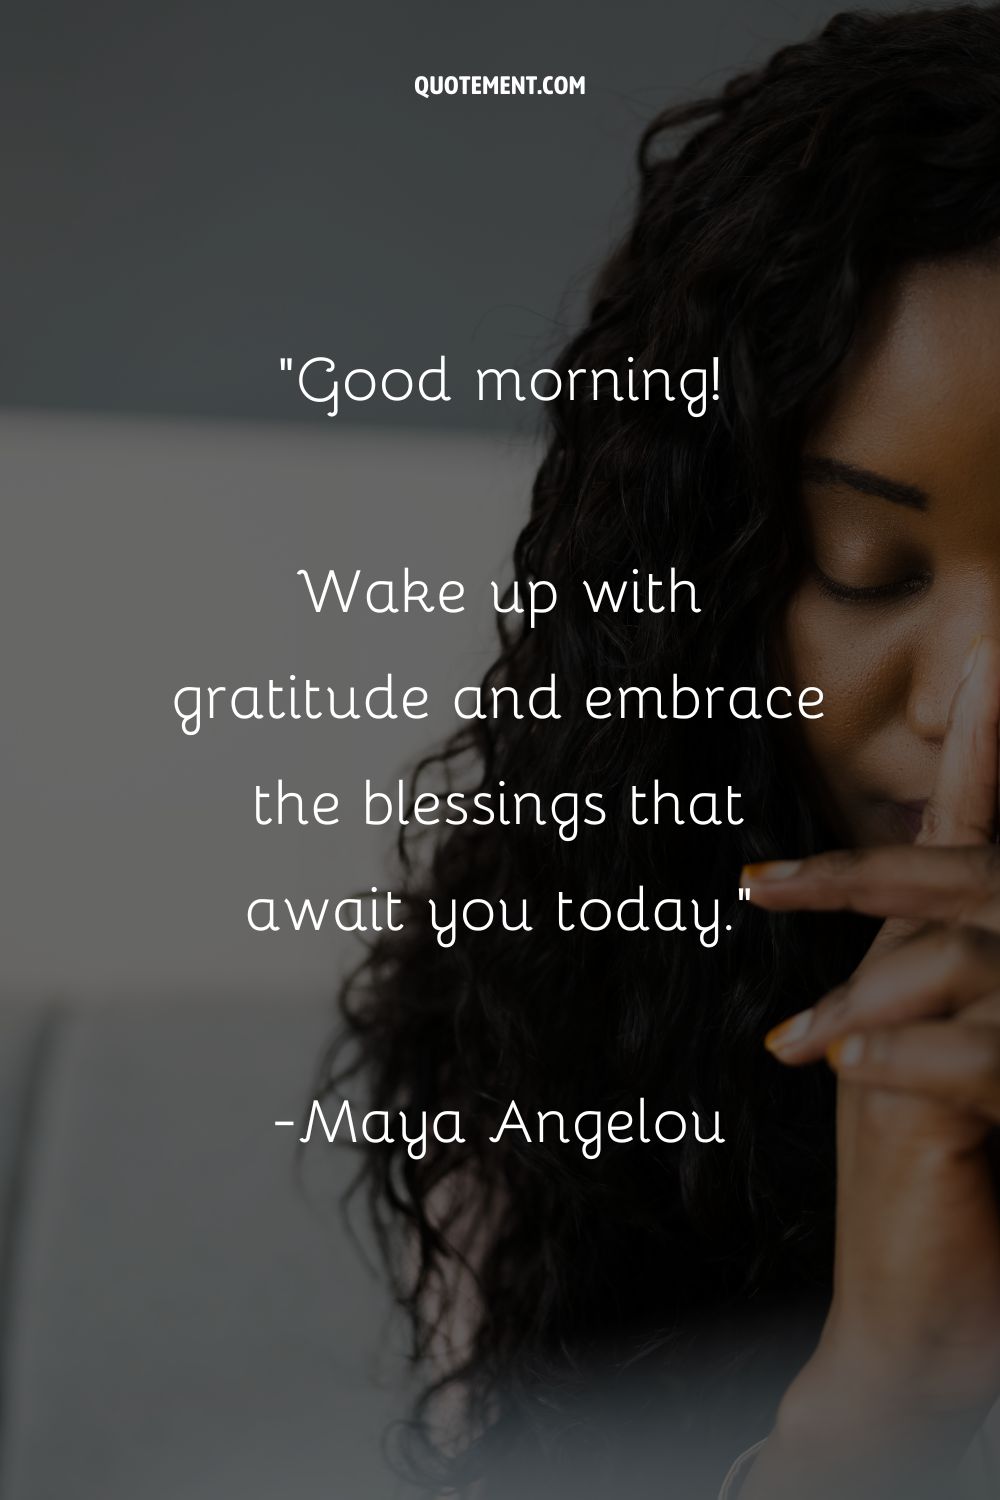 Good morning! Wake up with gratitude and embrace the blessings that await you today